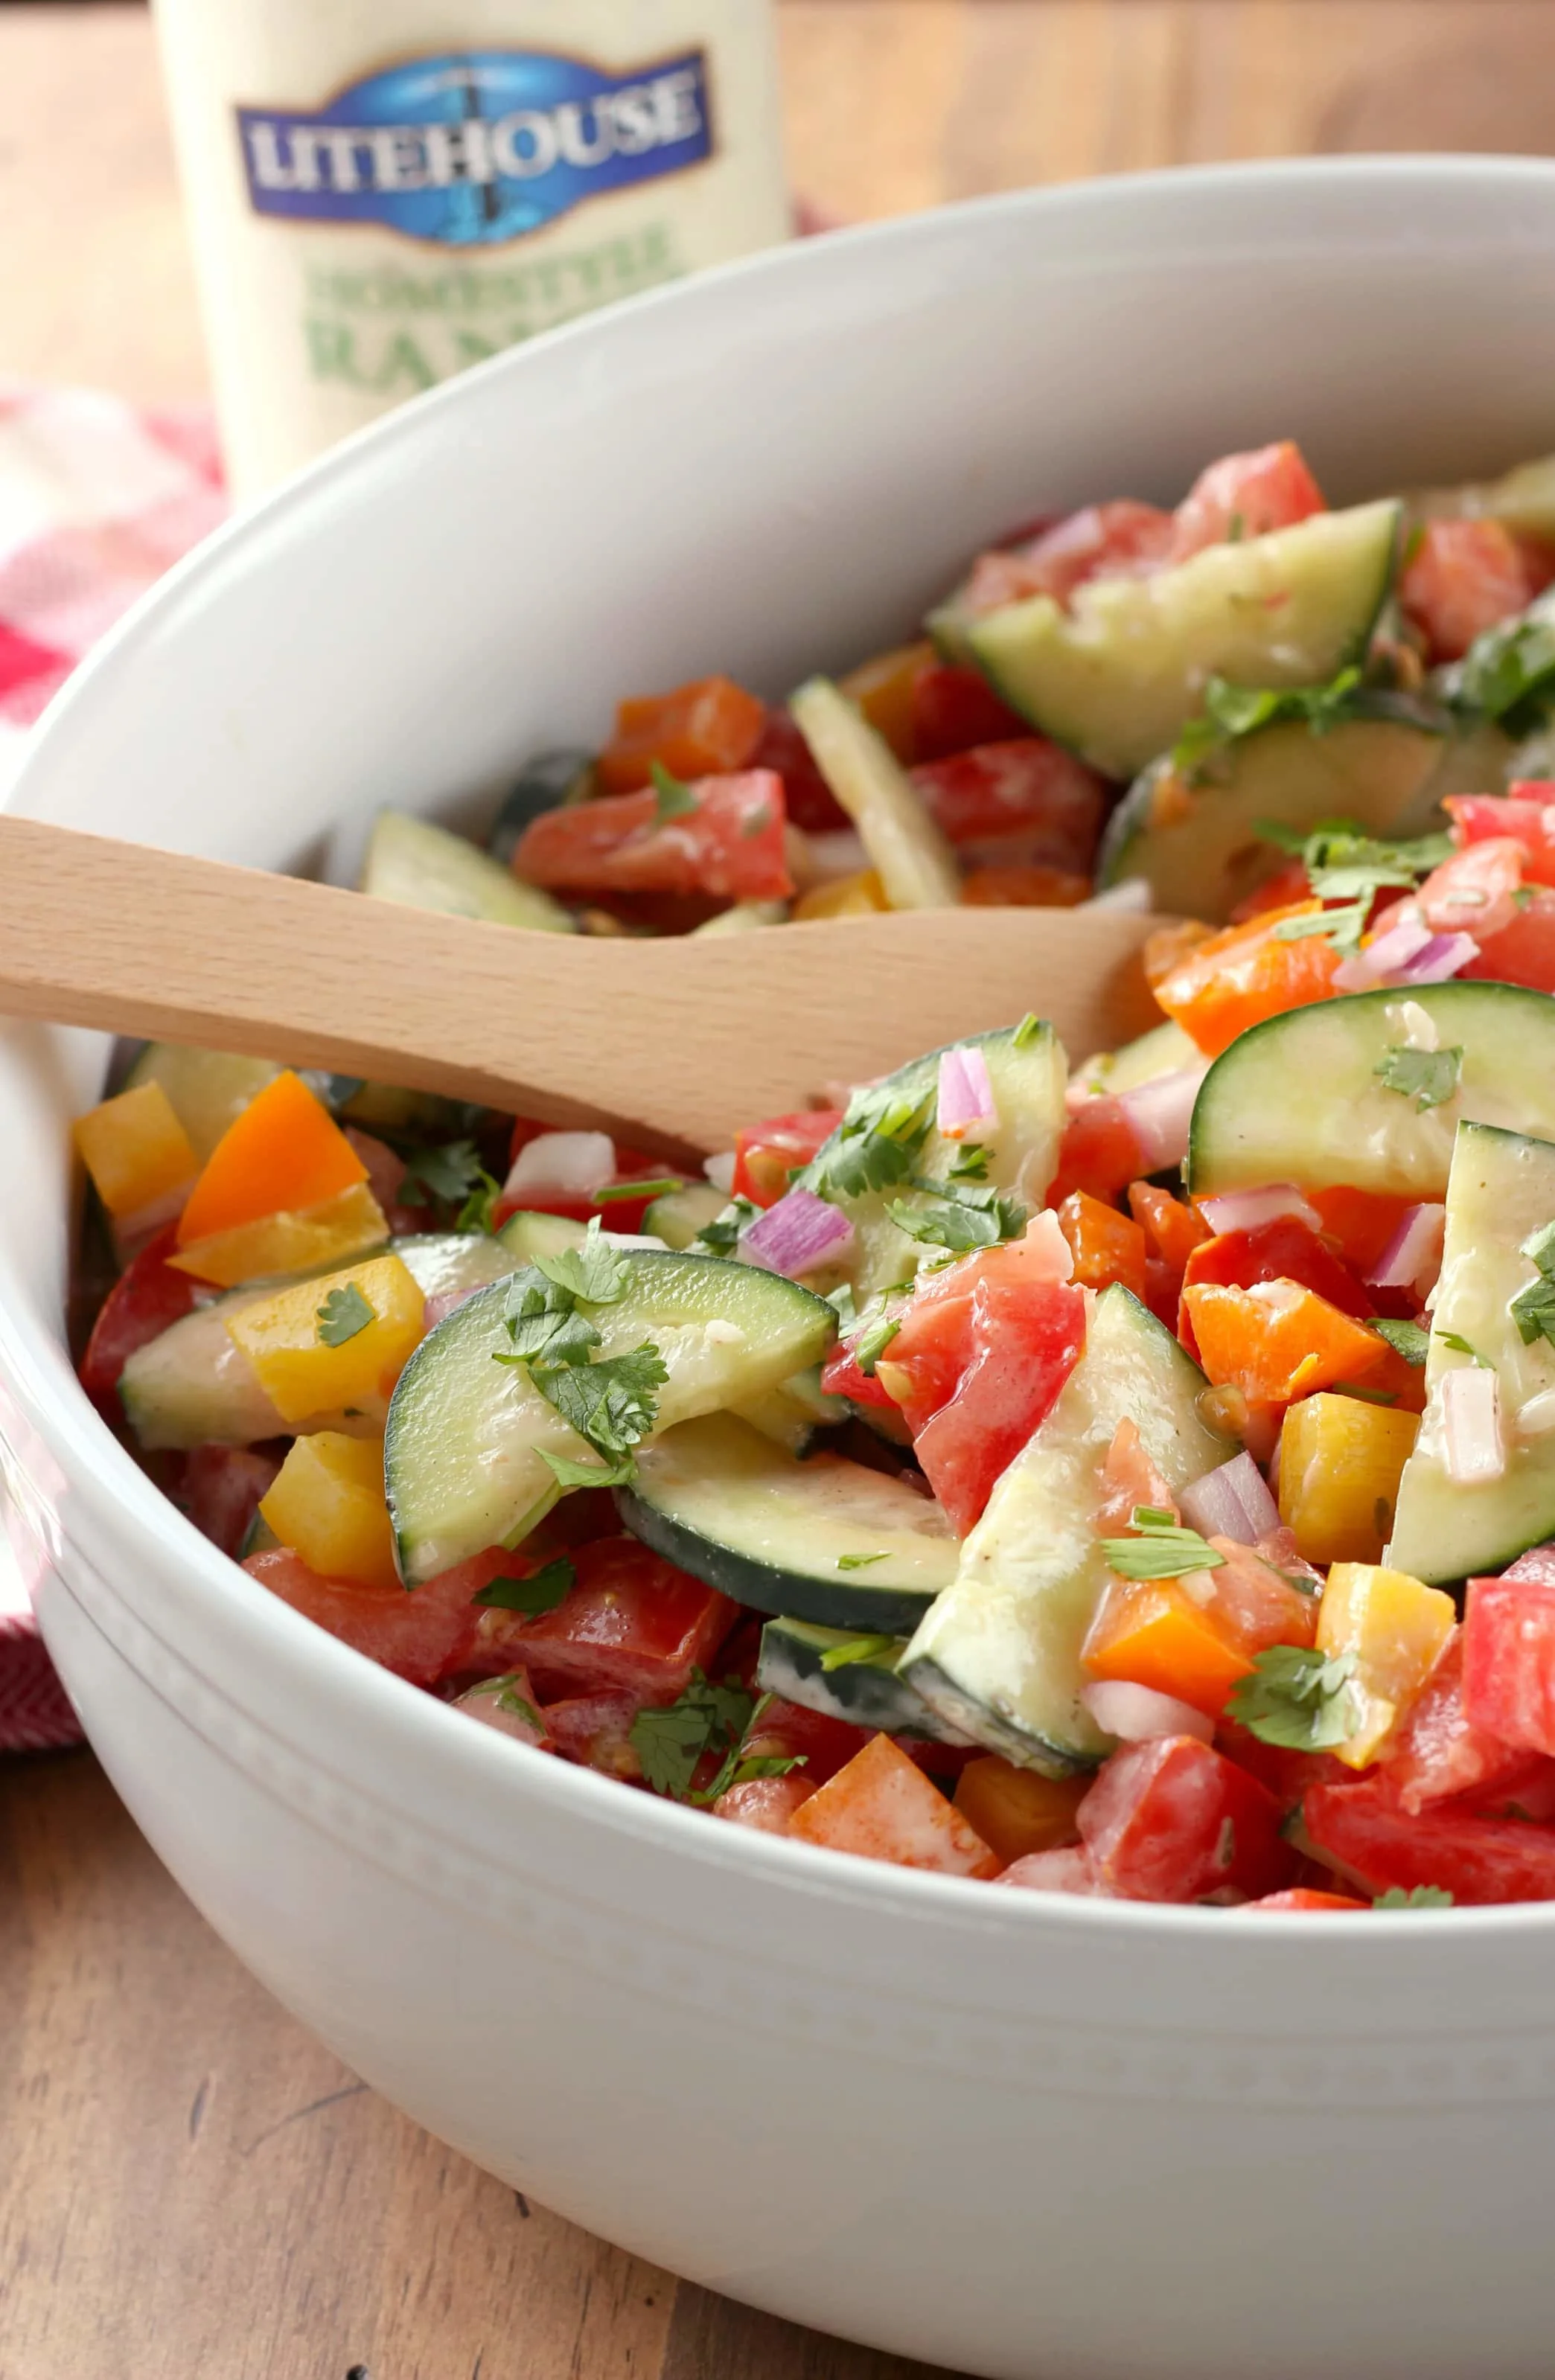 Ranch Tomato Cucumber Salad with Litehouse Dressing